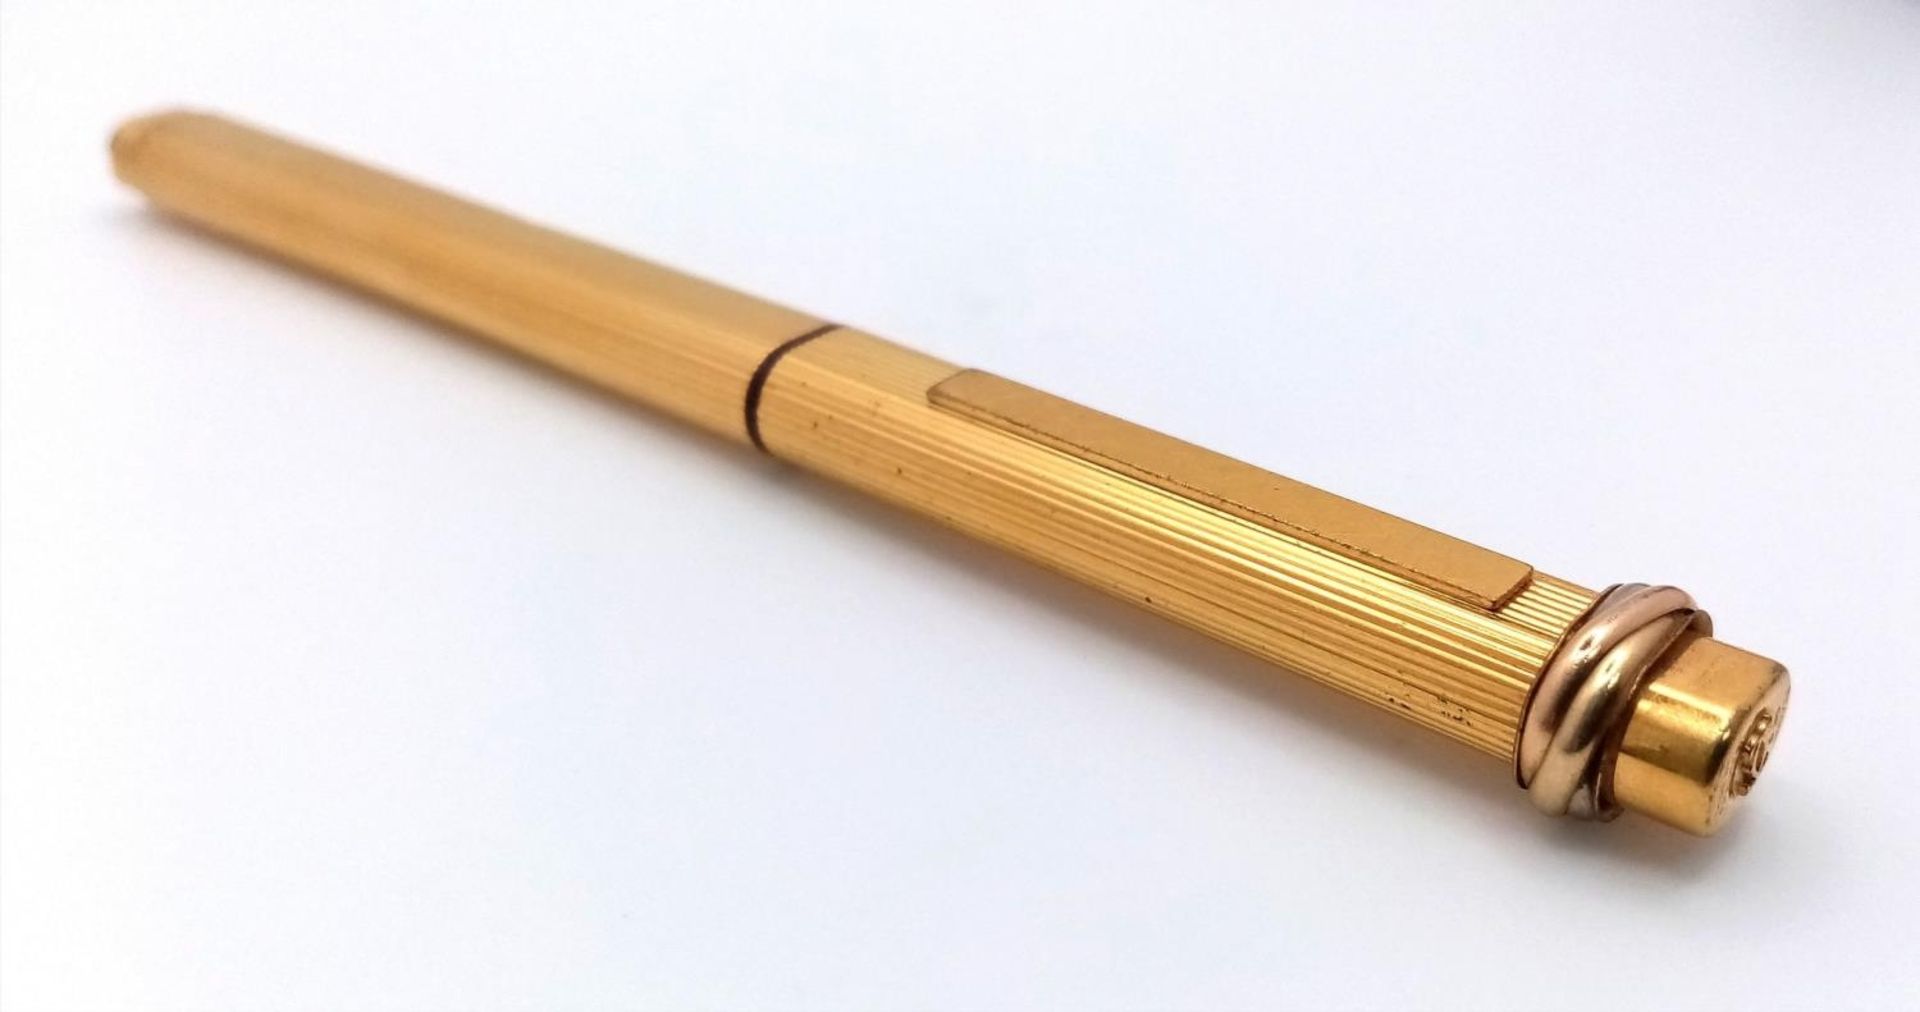 A CARTIER gold plated pen, length: 13. 7 cm, weight: 23.2 g. Ref: 17183 - Image 3 of 6